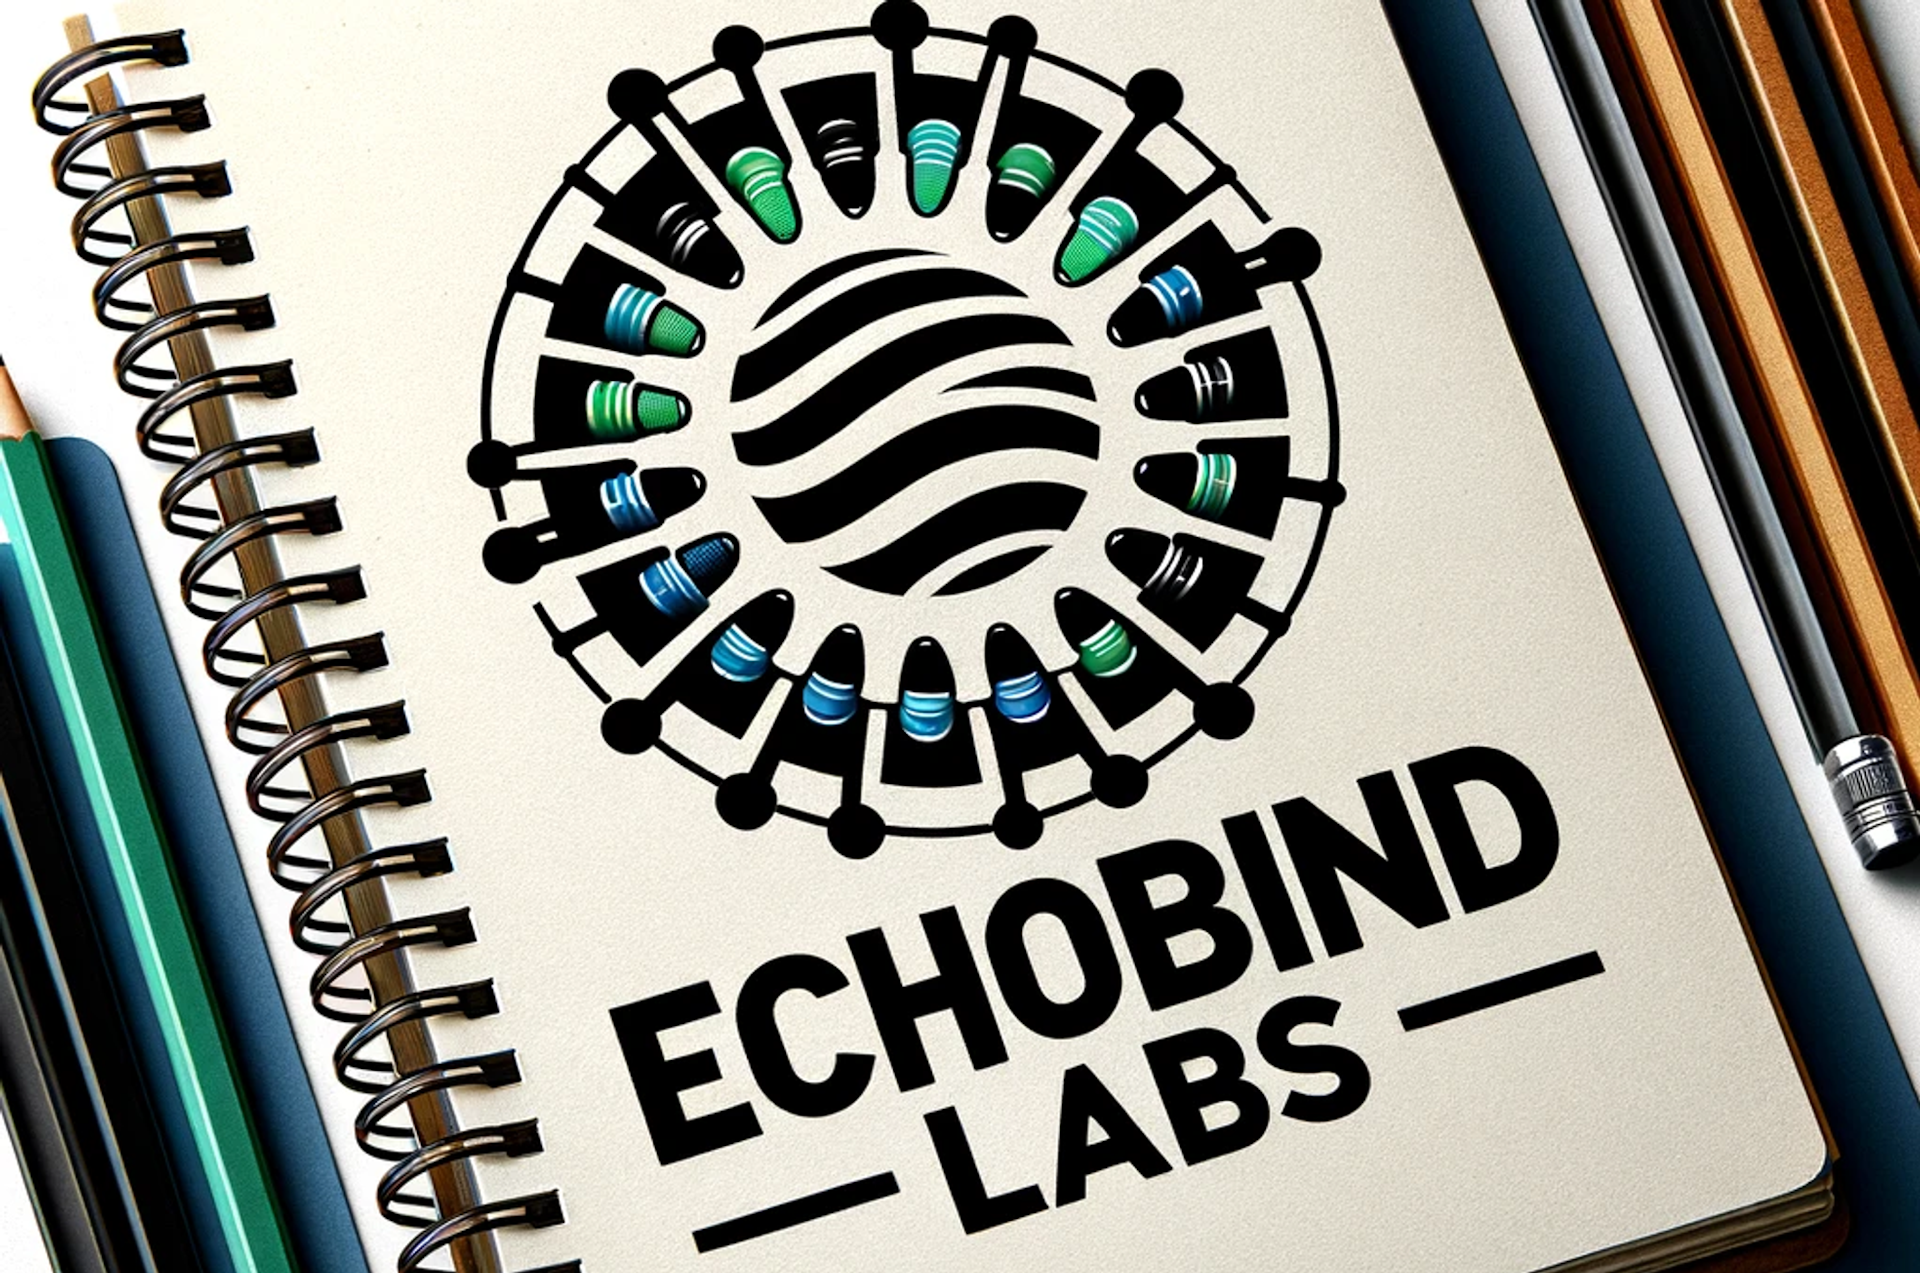 2024: The Year of Products at Echobind